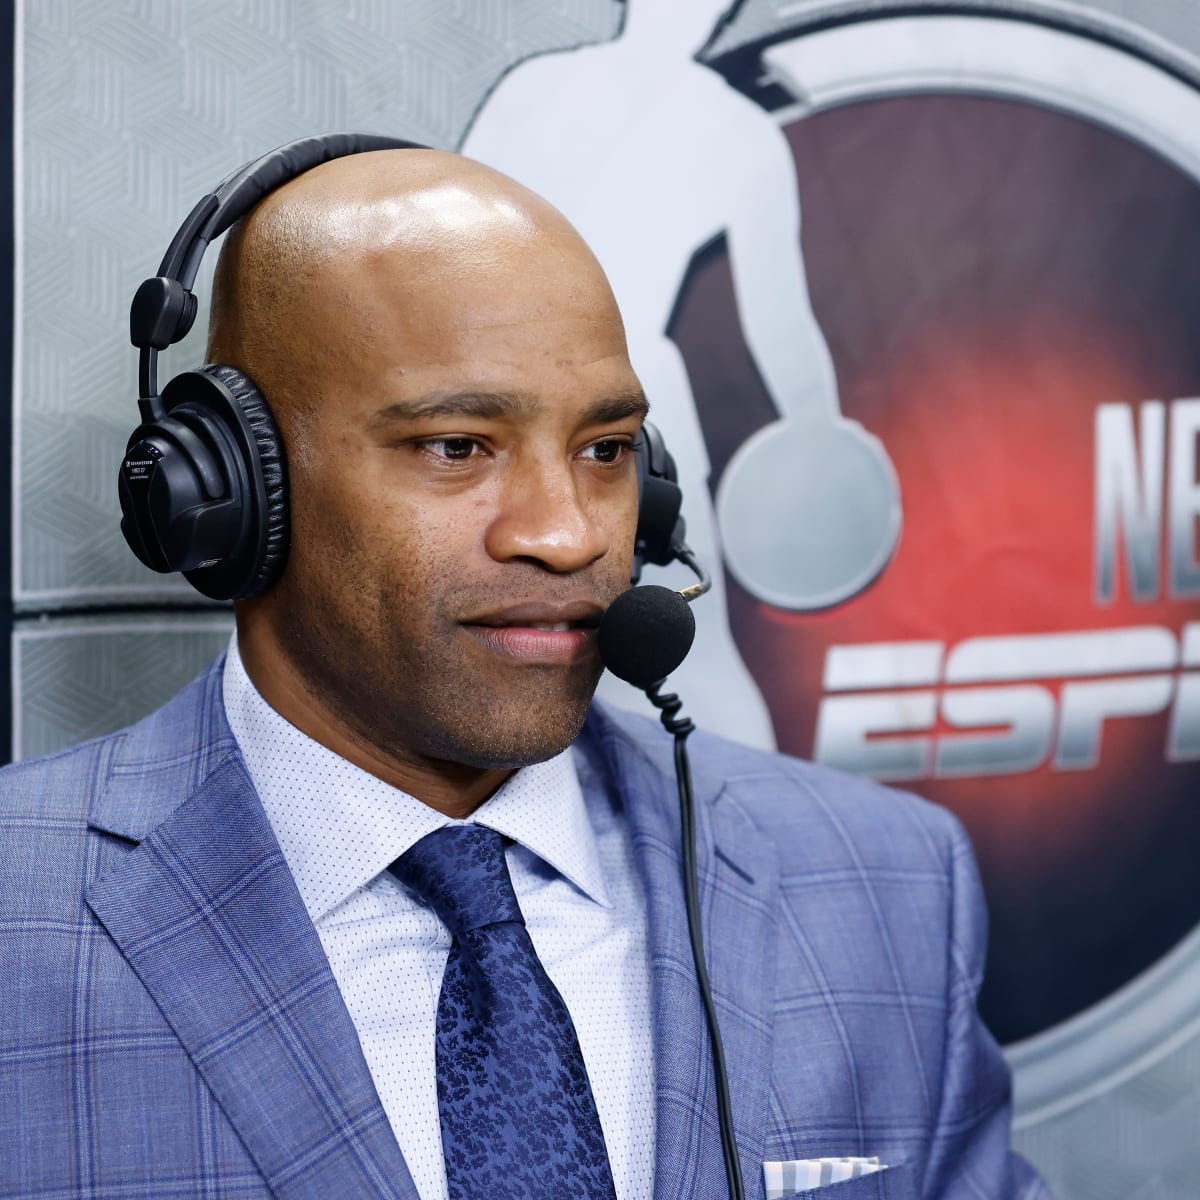 Vince Carter reportedly could be next ESPN castoff